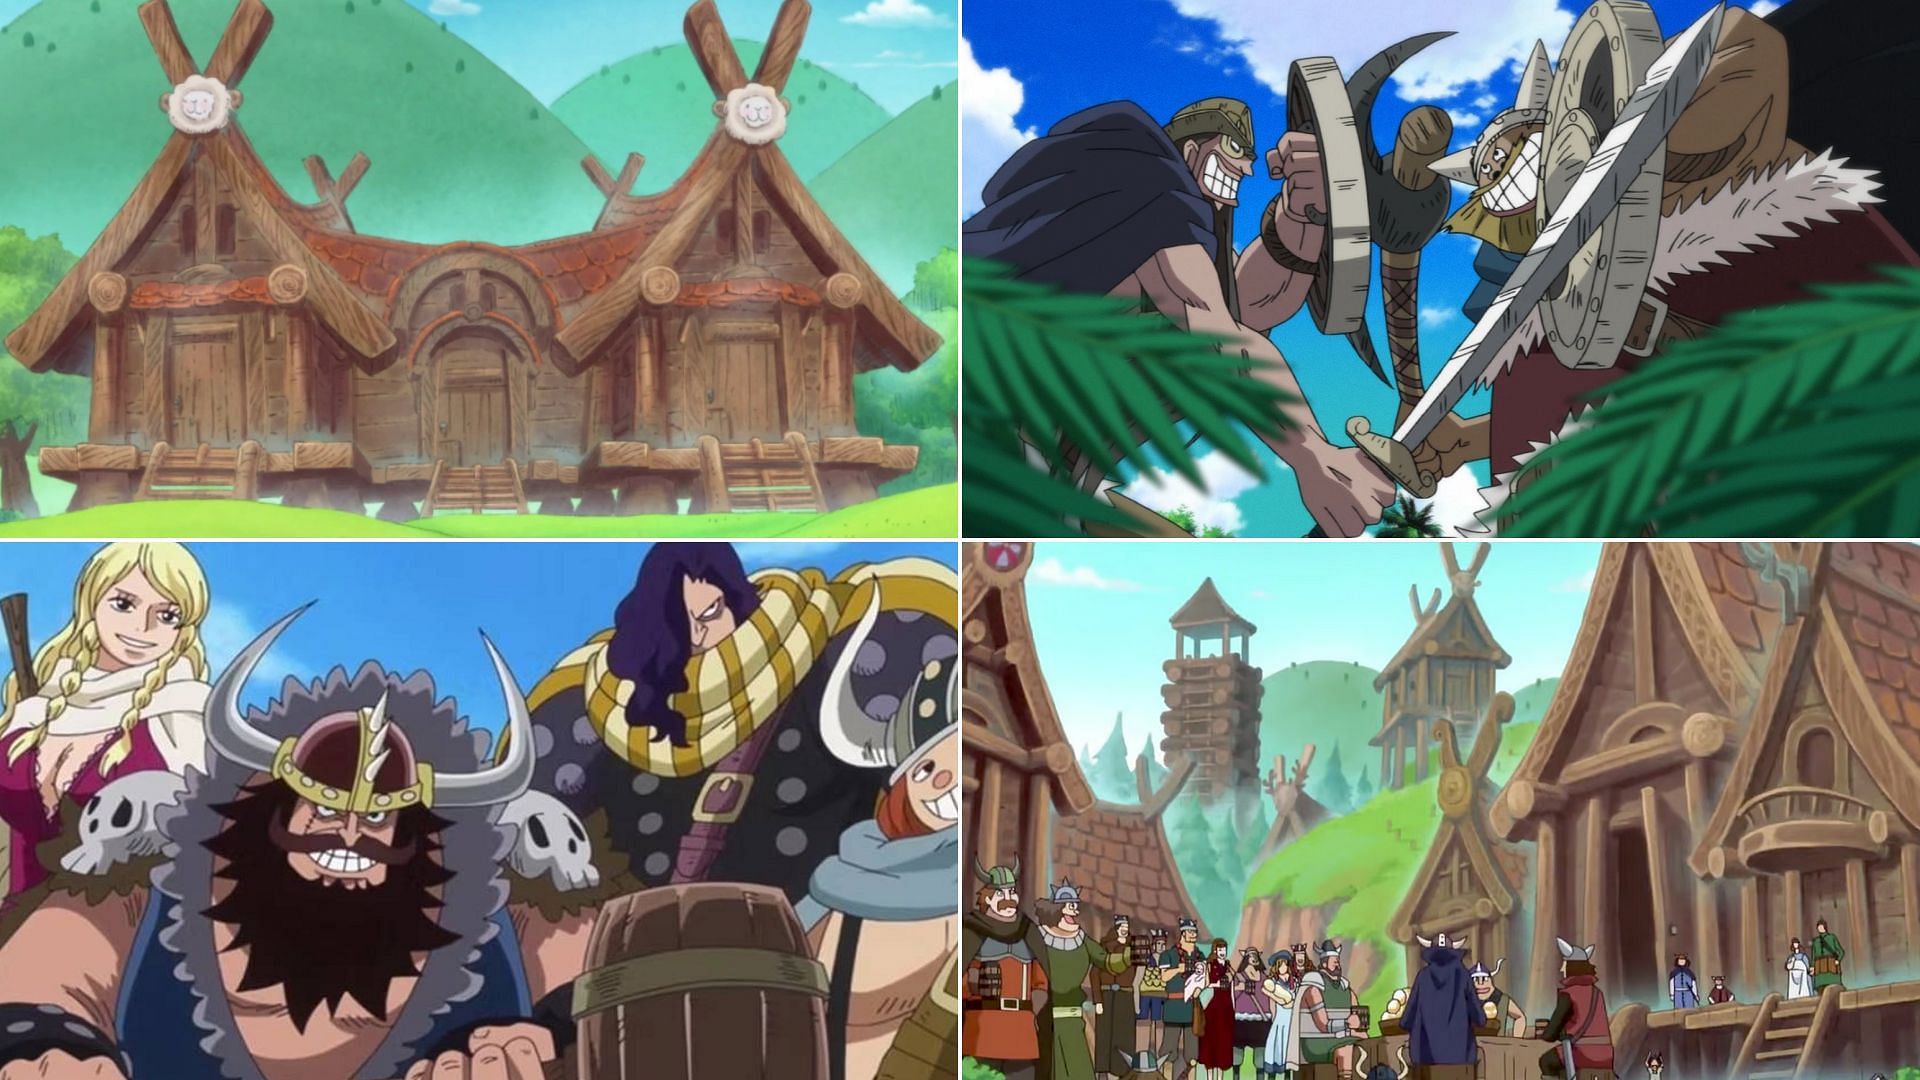 Elbaf and the Giants are clearly based on the typical Norse folklore (Image via Toei Animation)